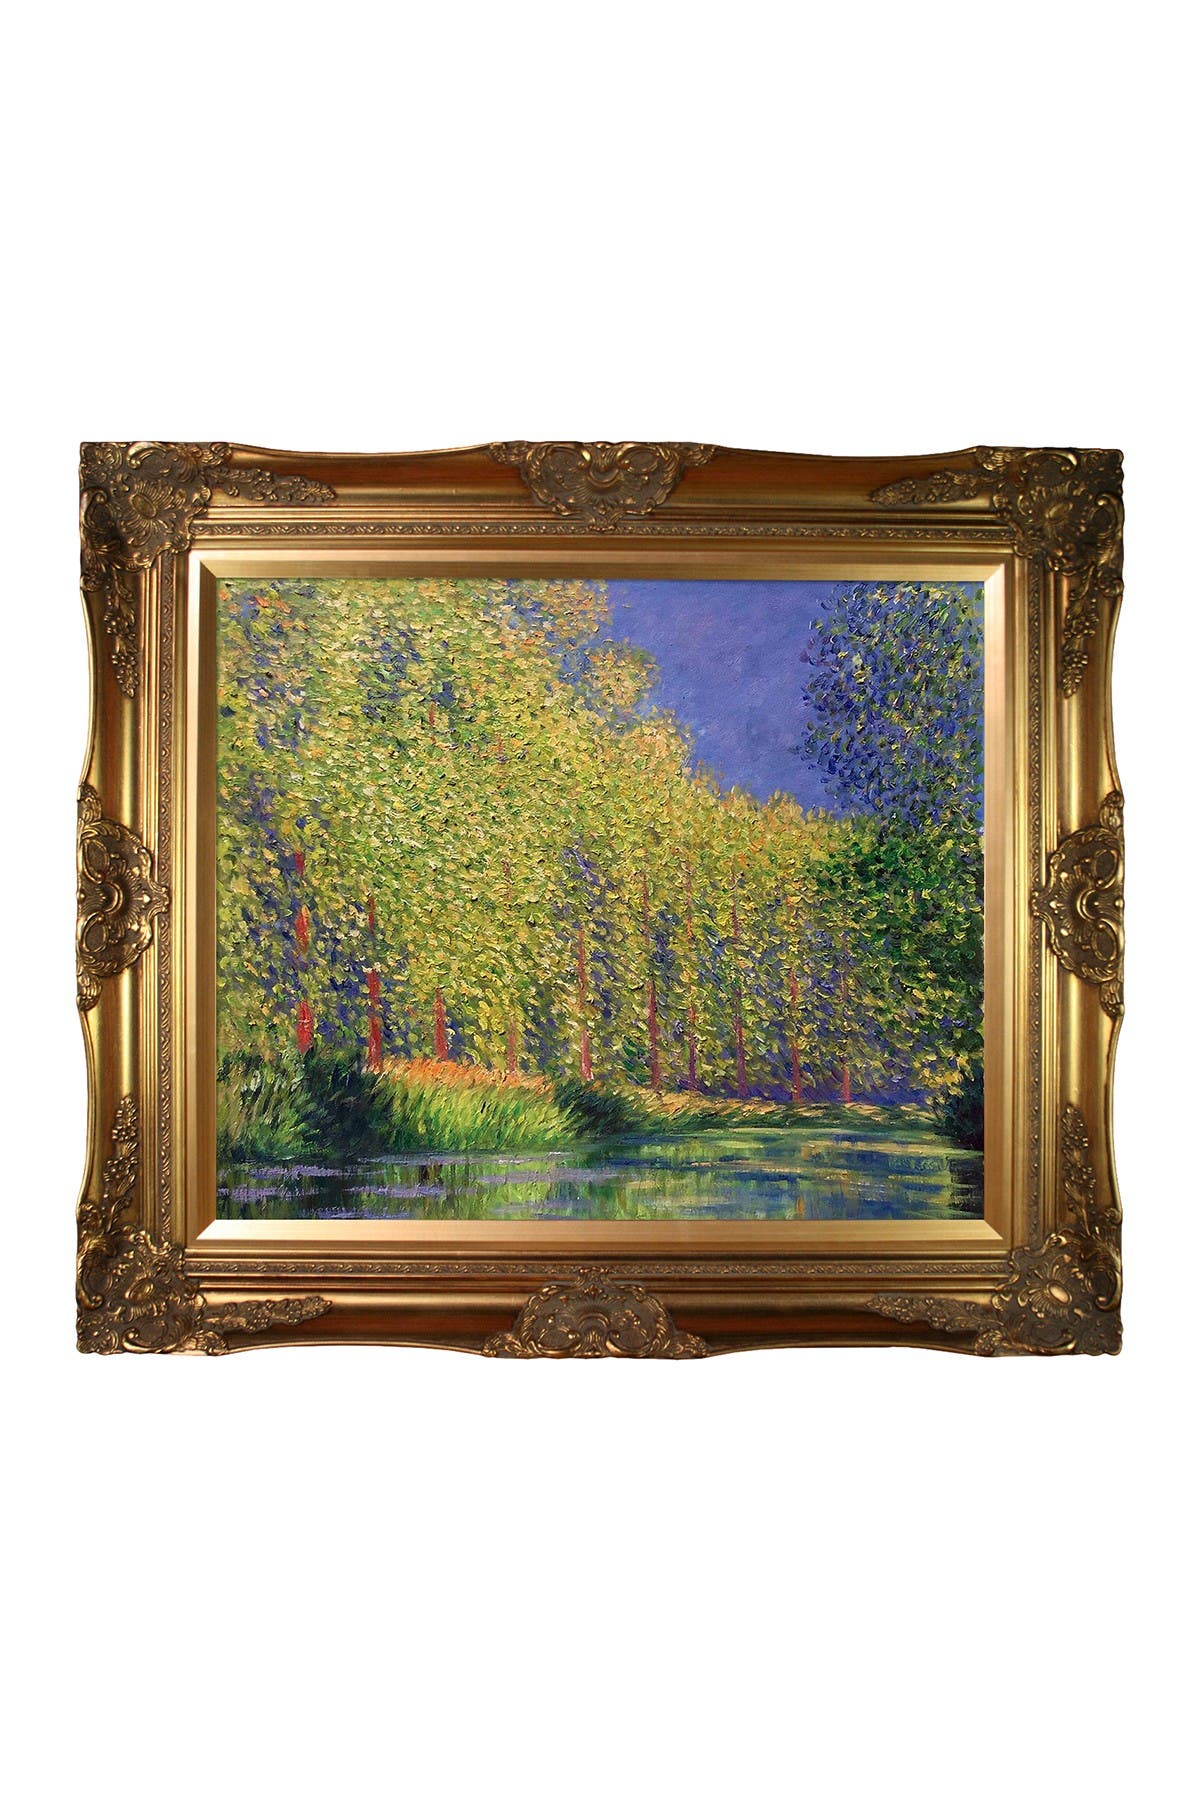 1876 overstockArt Les Tuileries Musee Marmottan Oil Painting with Victorian Gold Frame by Monet